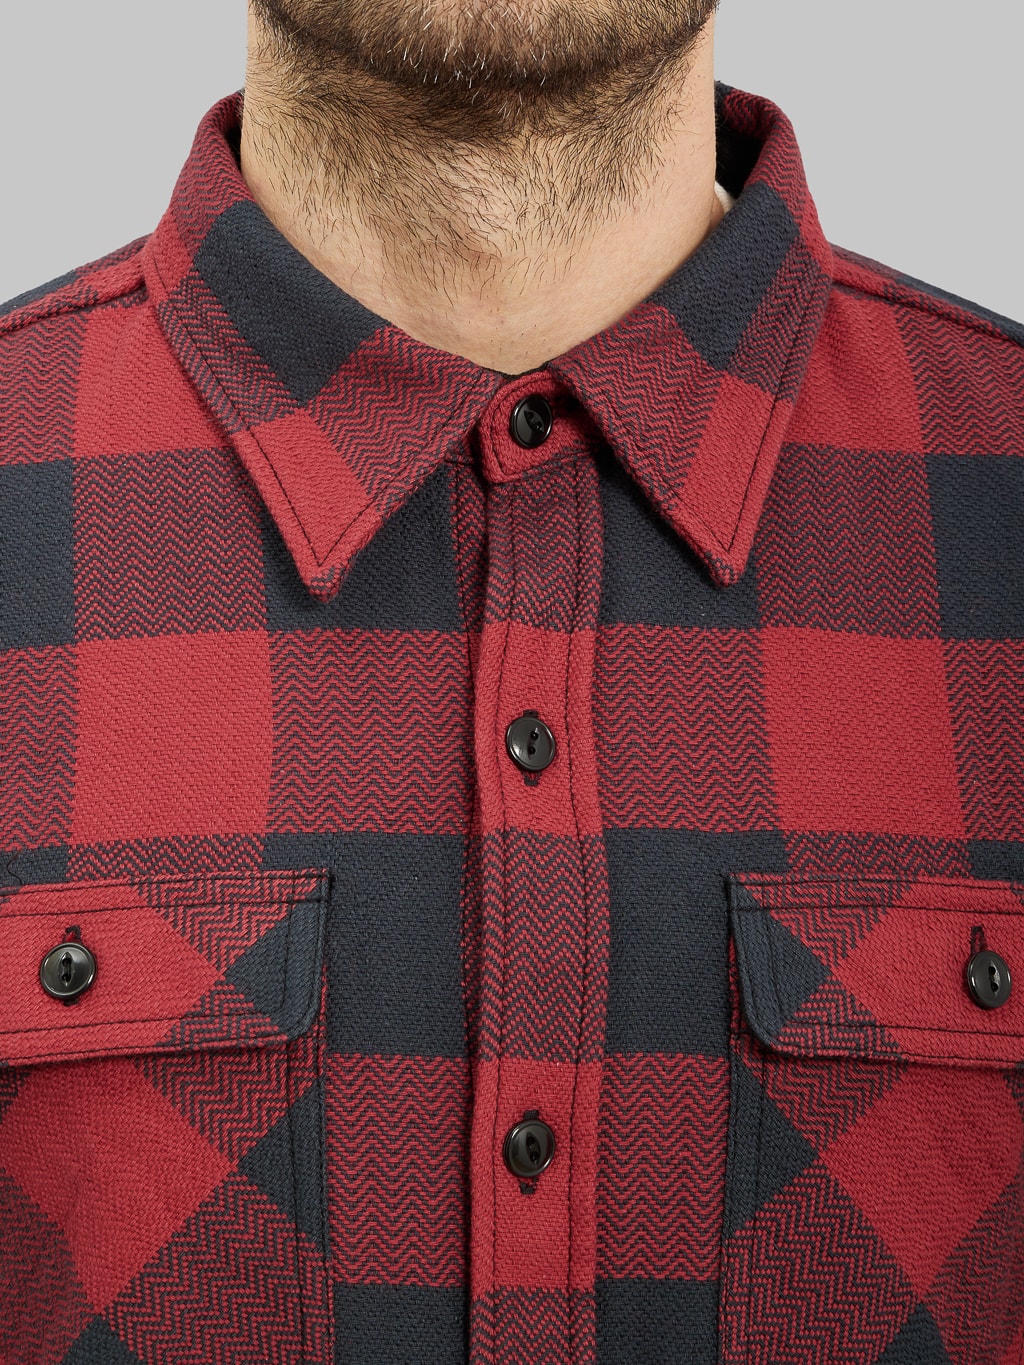 the flat head block check flannel shirt black red chest pockets